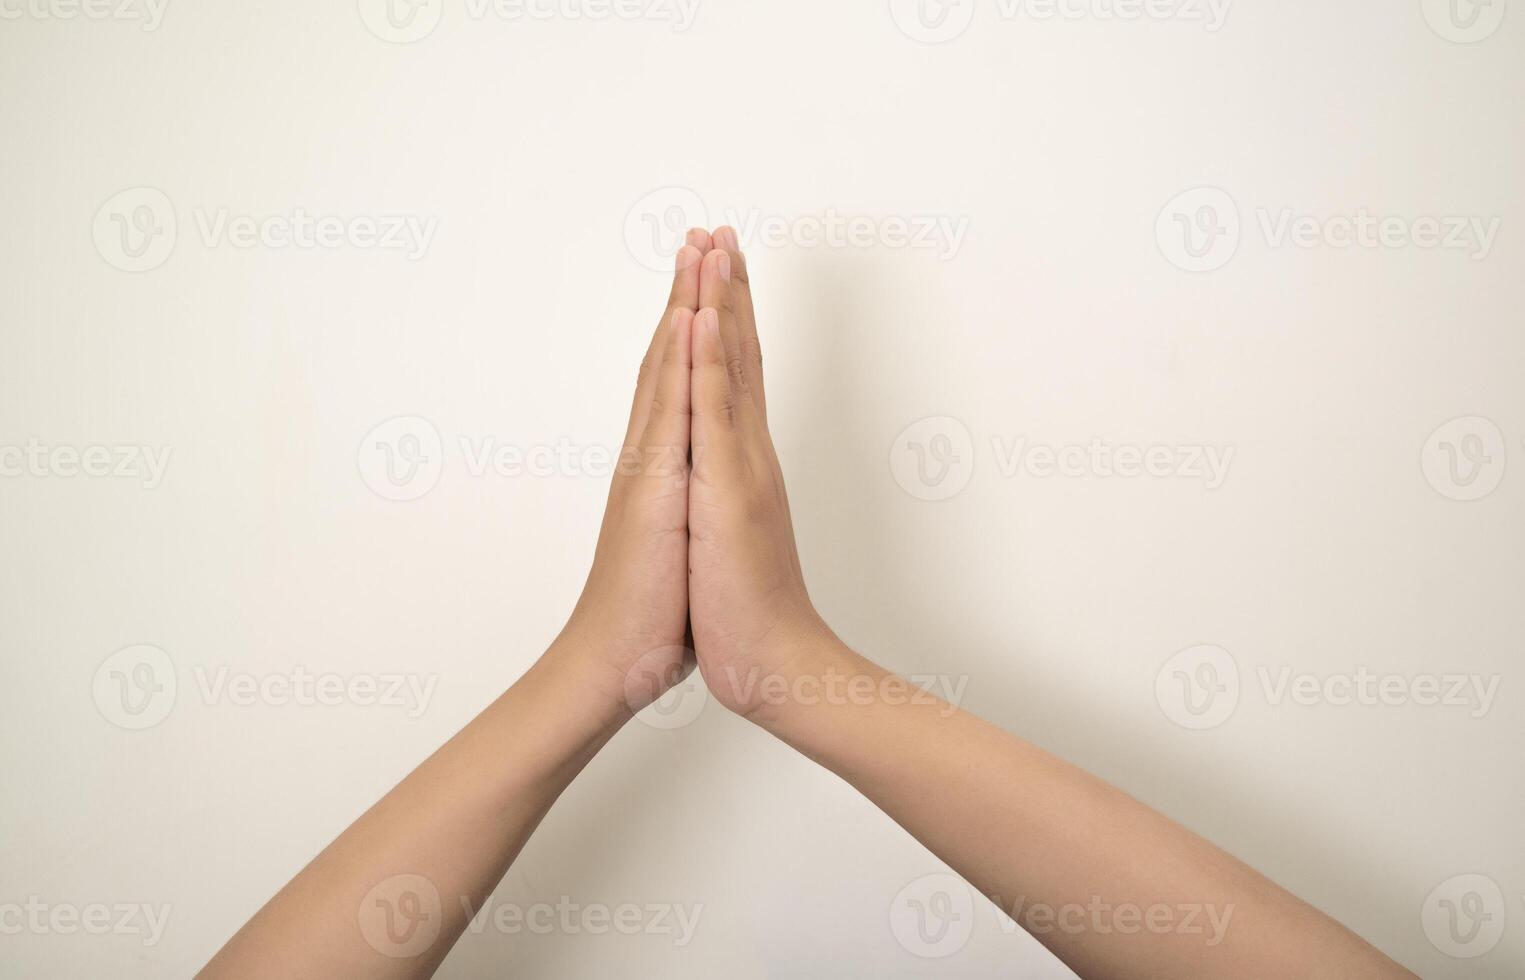 Hand pointing at something and make a sign on white background photo